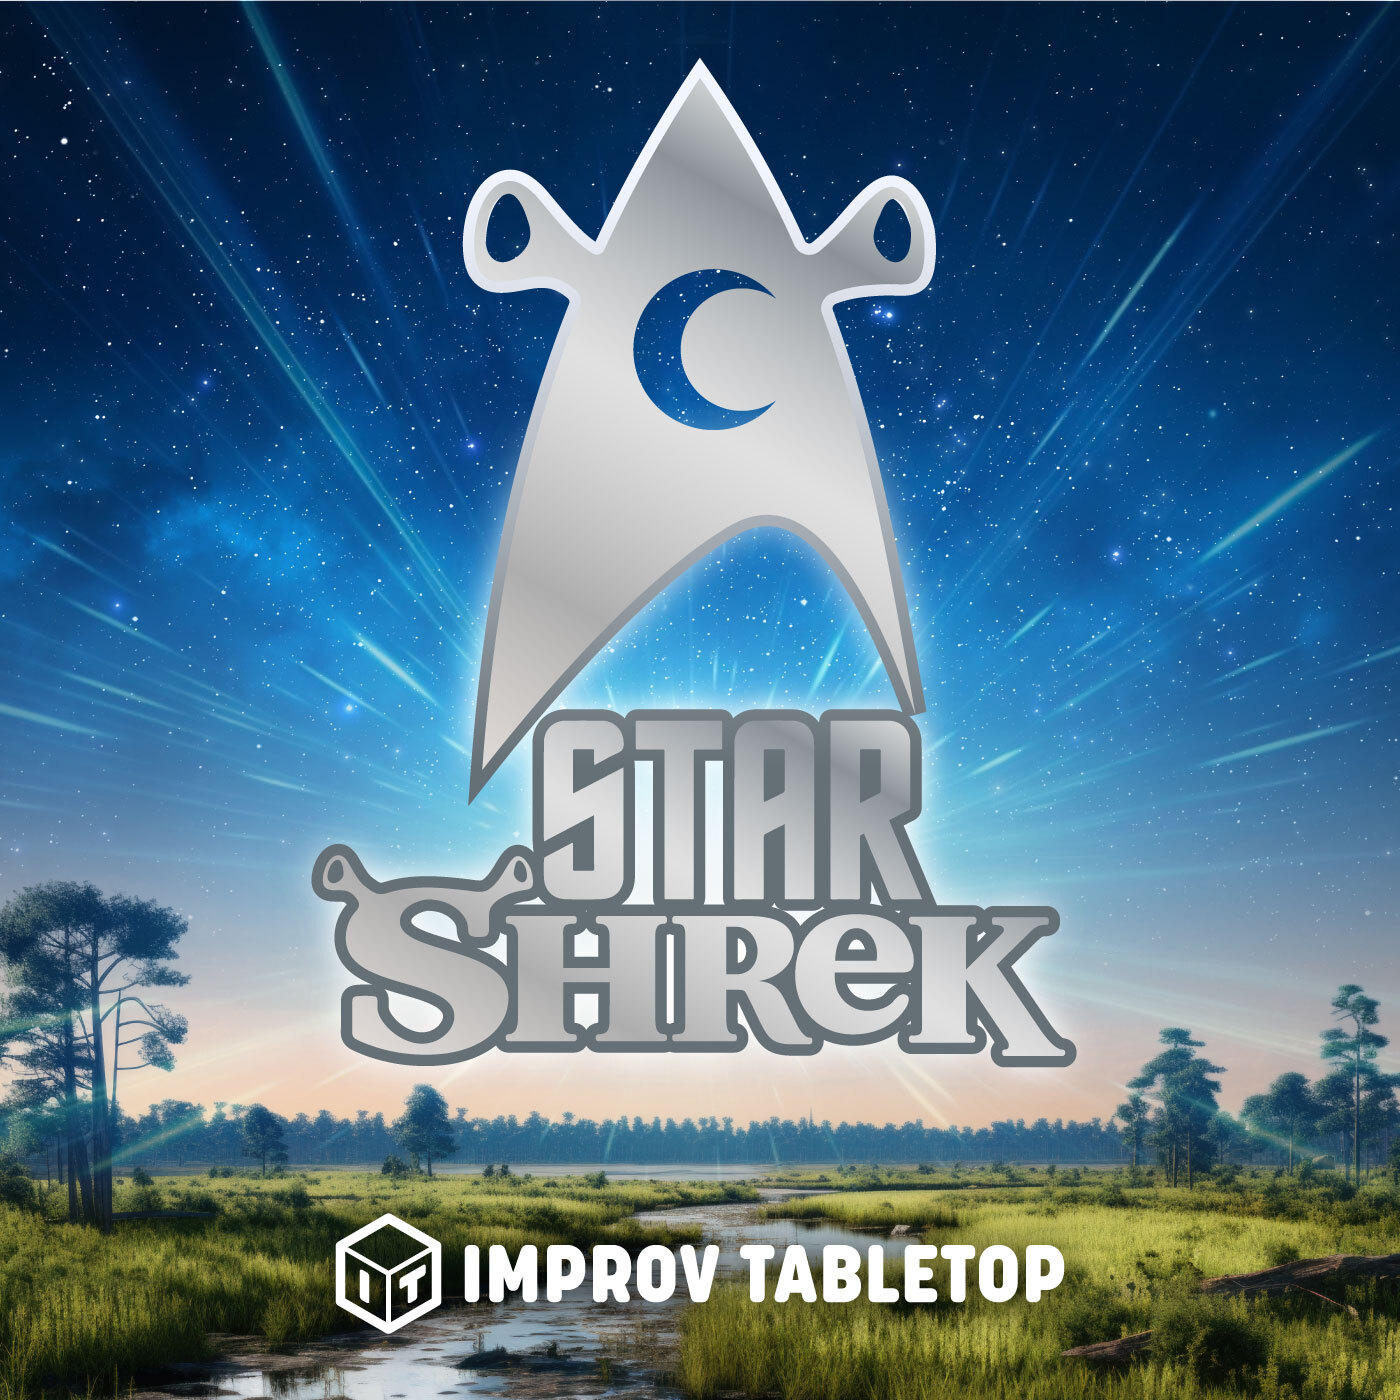 Title "Star Shrek" beneath a modified version of the Star Trek emblem with Shrek ears and an outhouse crescent moon. In the background, a beautiful galaxy rises over a swamp/